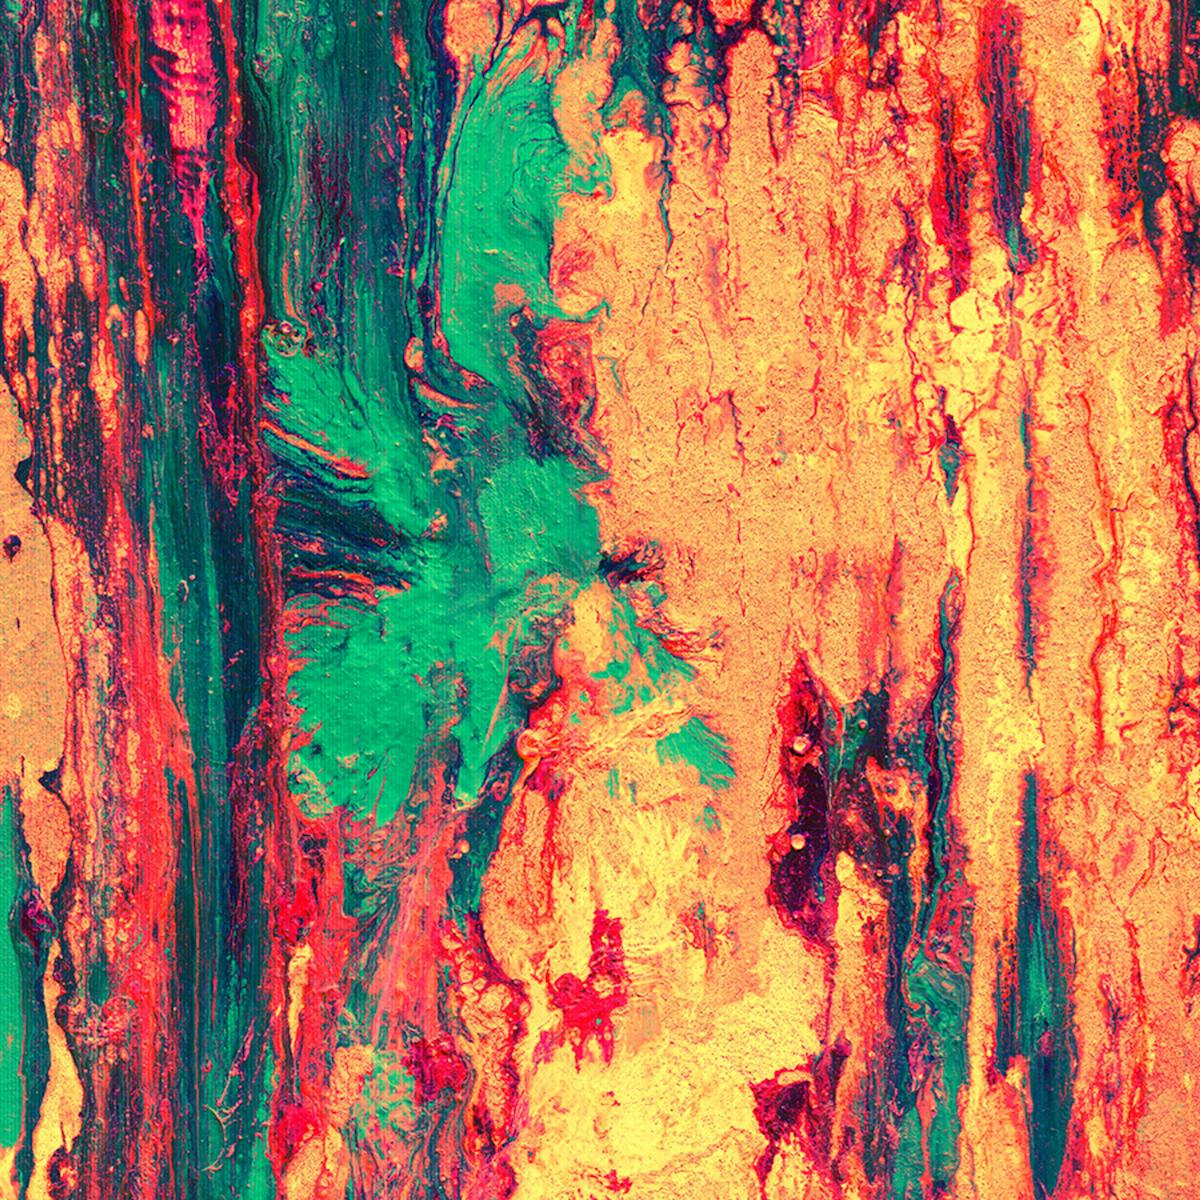 Brightly coloured abstract painting; predominantly red, orange, yellow and green.